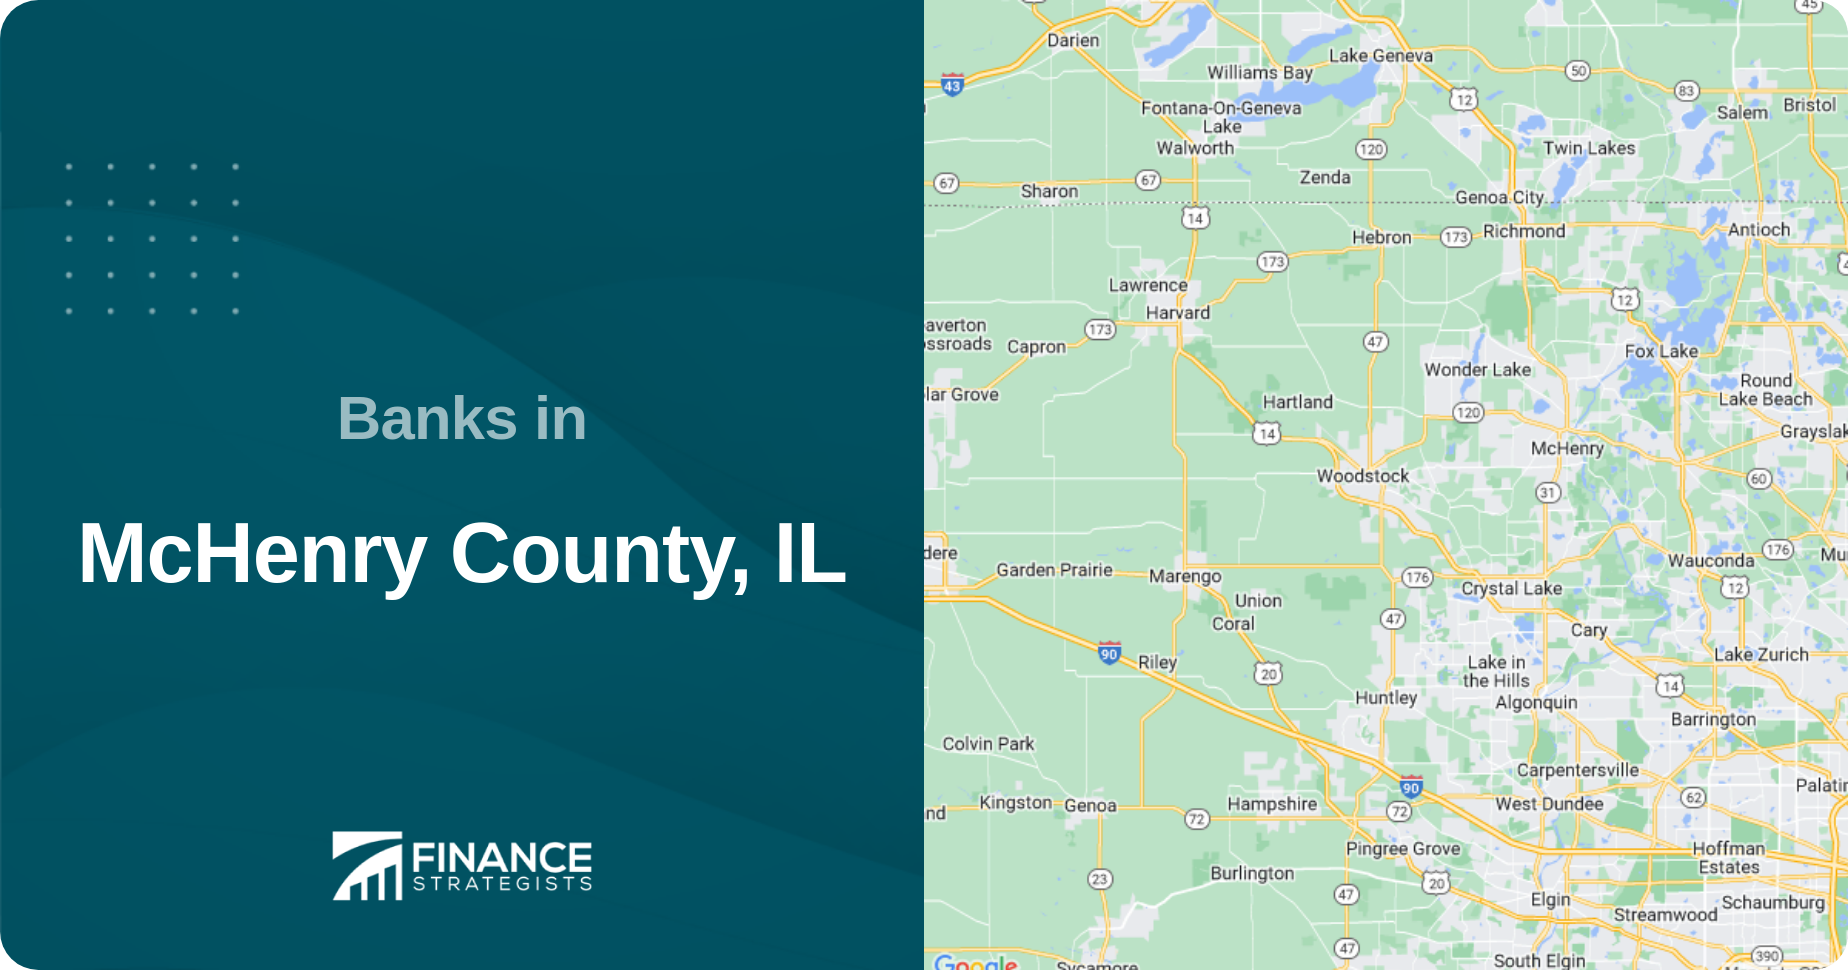 Banks in McHenry County, IL